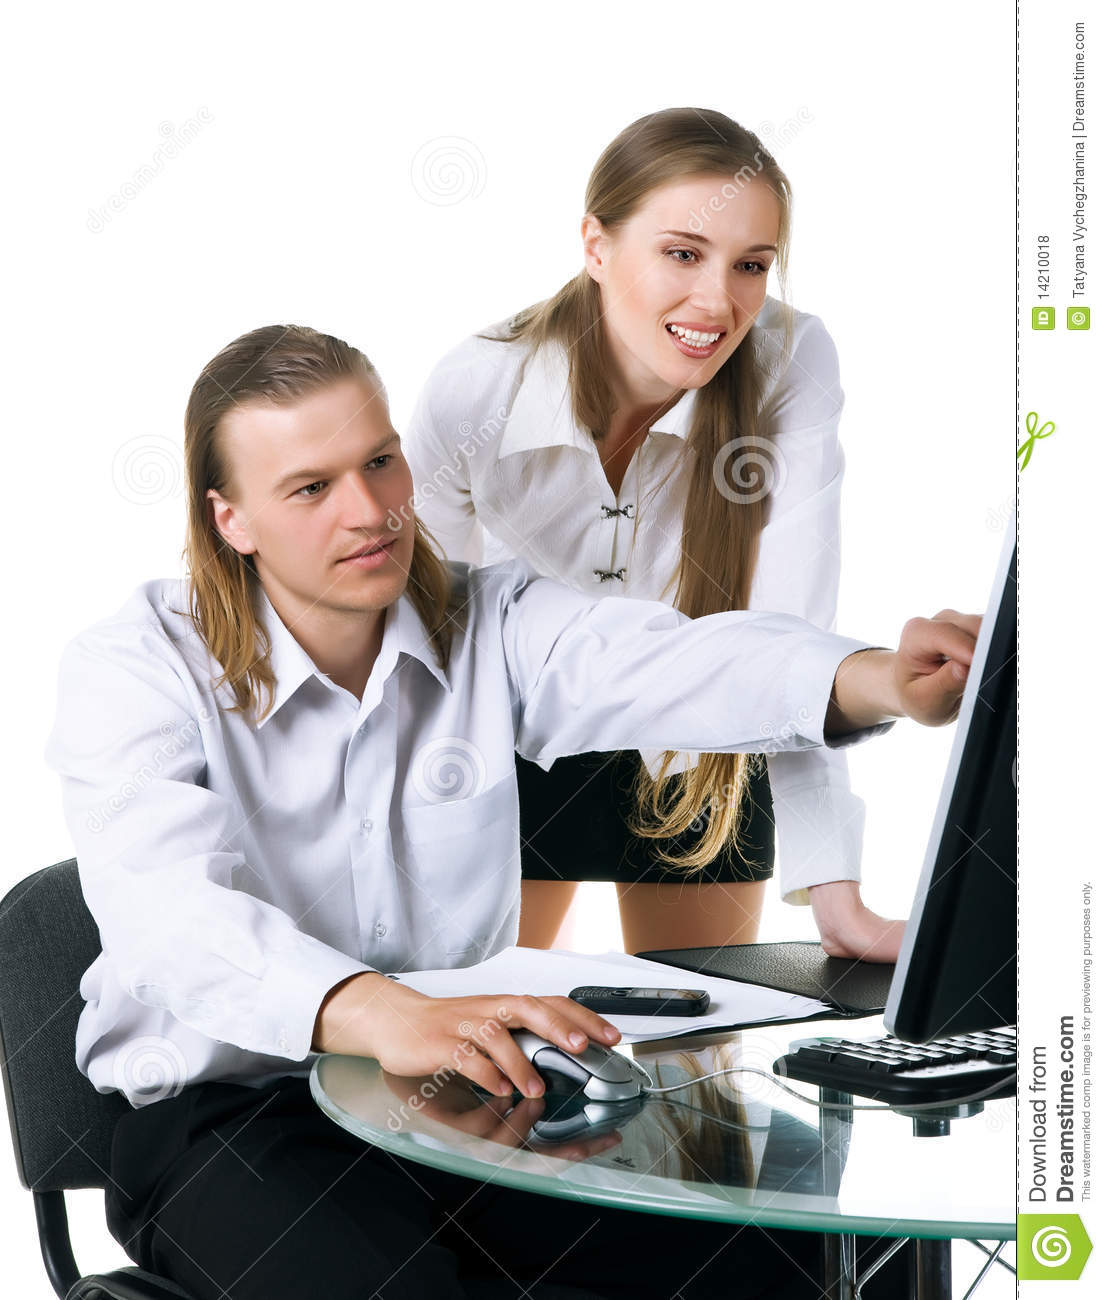 Two Business People Working